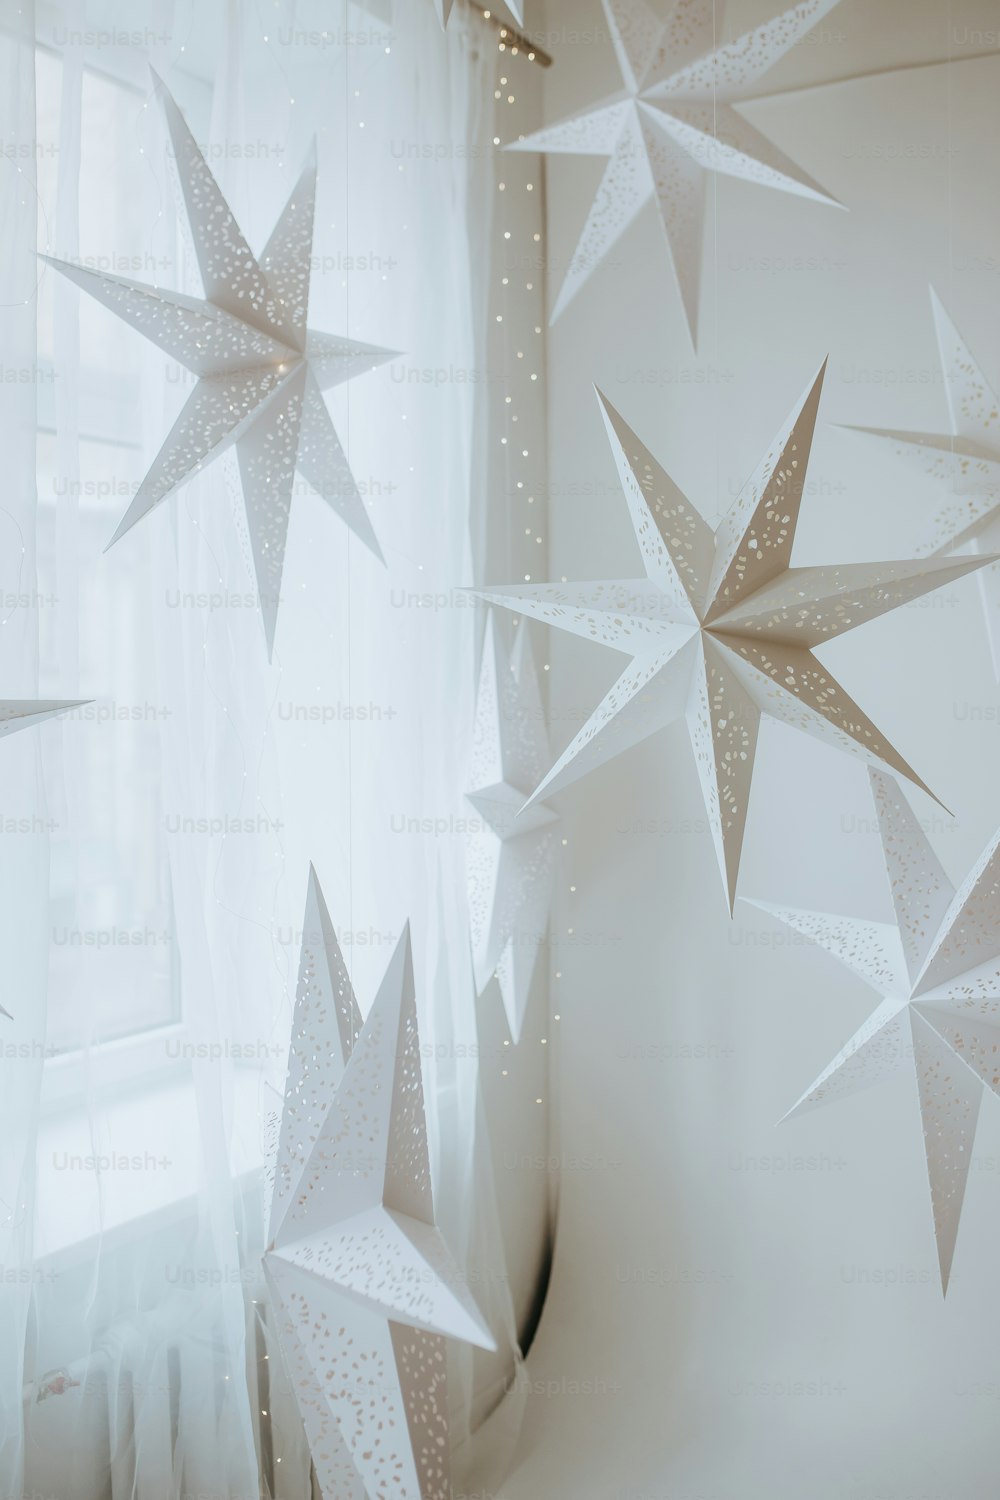 a window with a curtain and some paper stars hanging from it